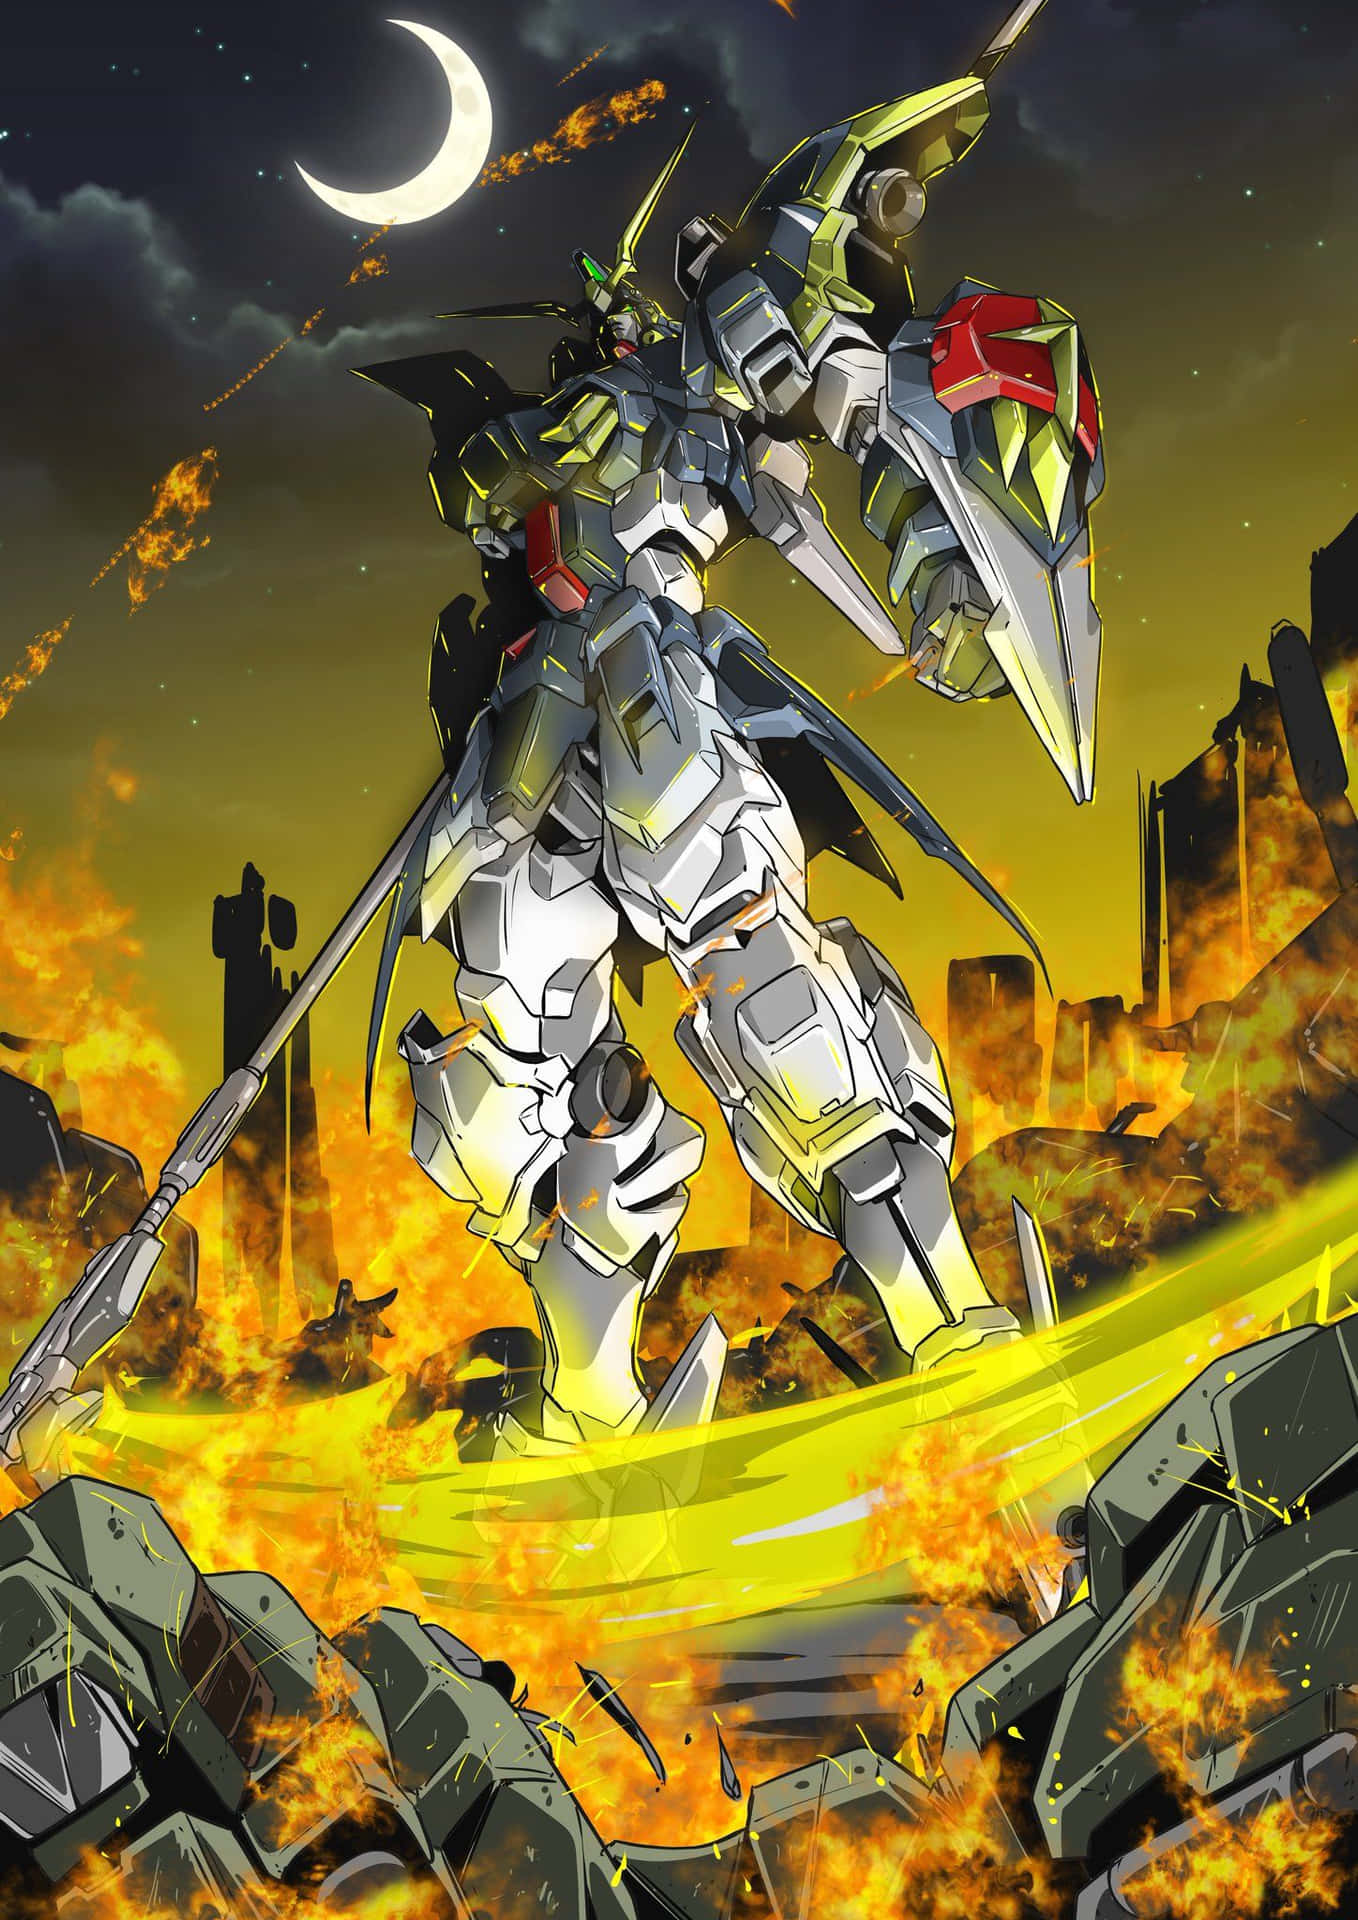 A Mobile Suit in Action Wallpaper